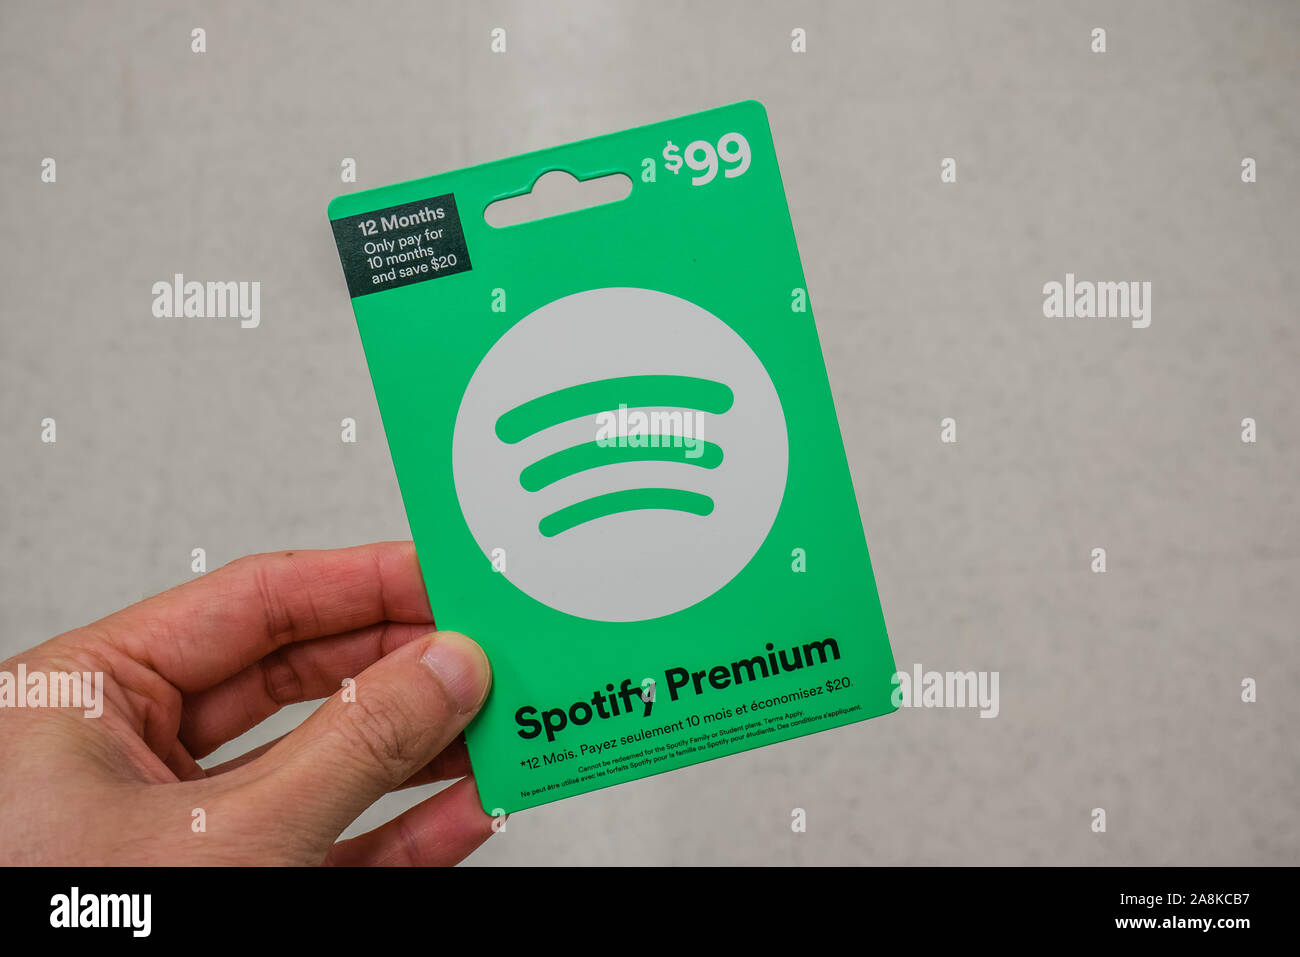 Spotify Pink Gift Card of Premium Subscription in a Hand at Store